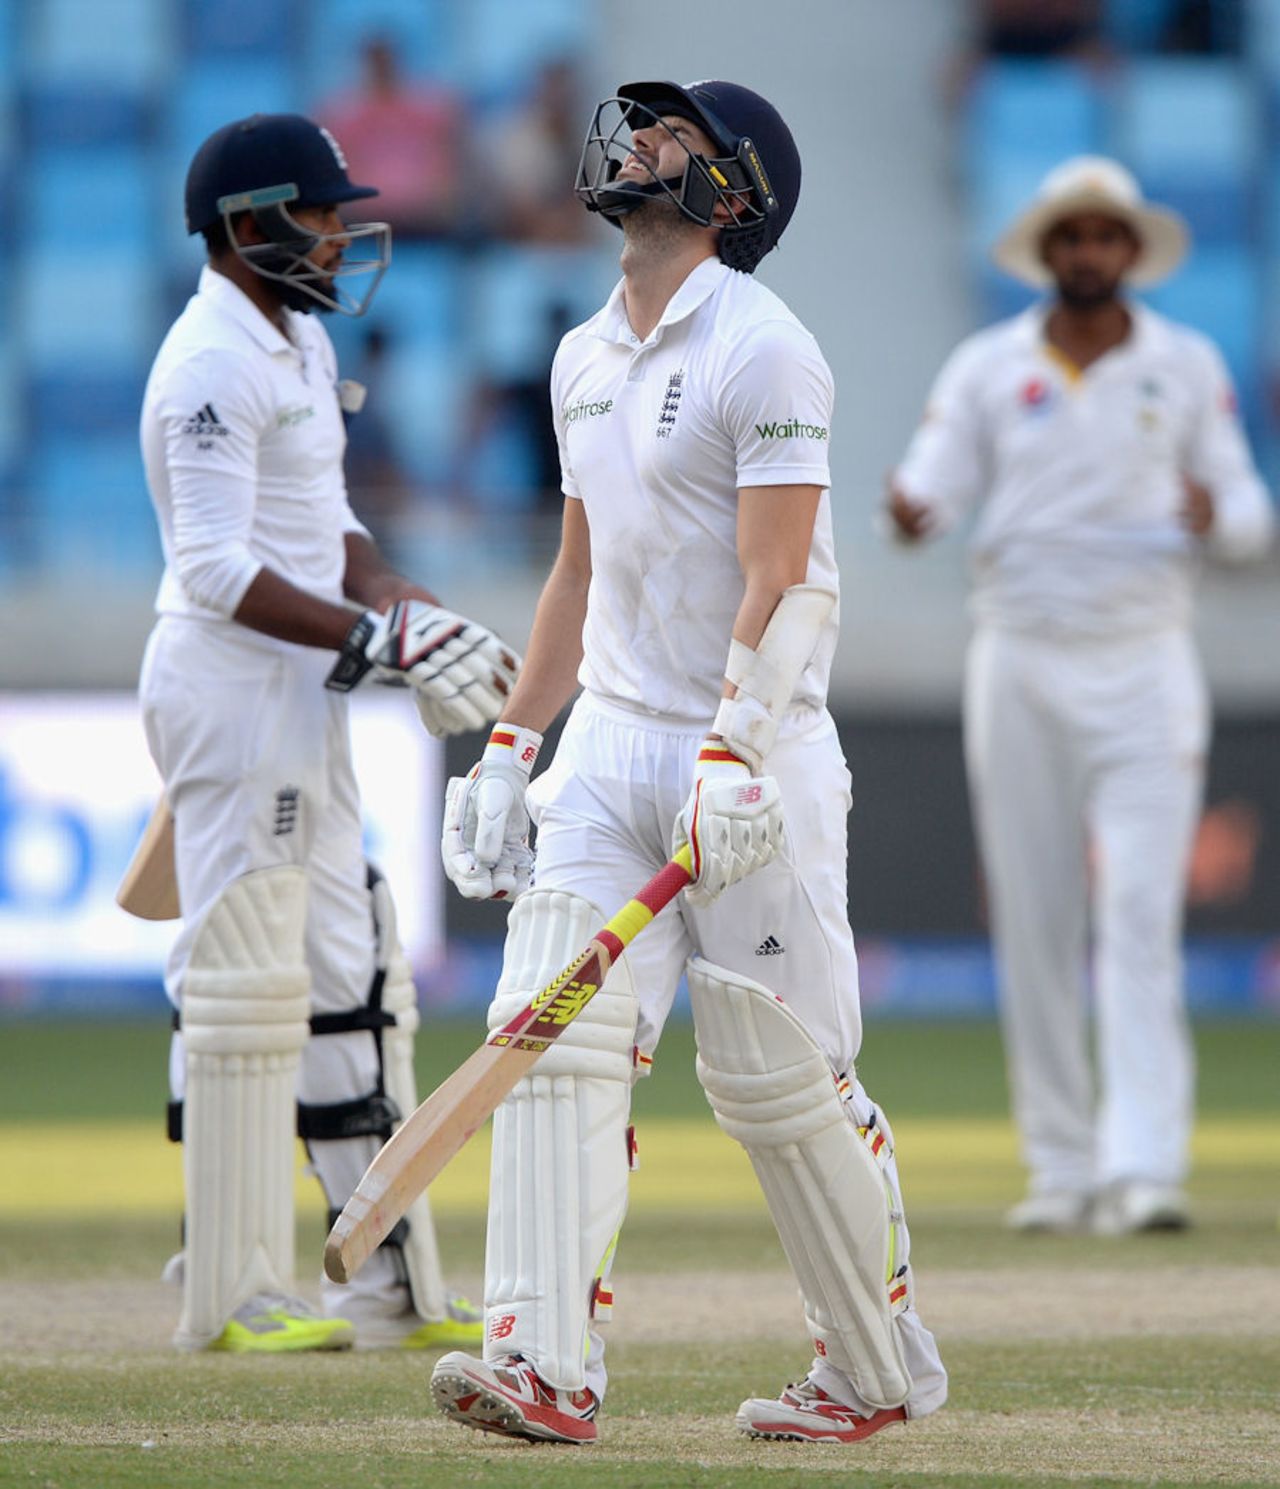 Mark Wood shows his disappointment after being dismissed, Pakistan v England, 2nd Test, Dubai, 5th day, October 26, 2015